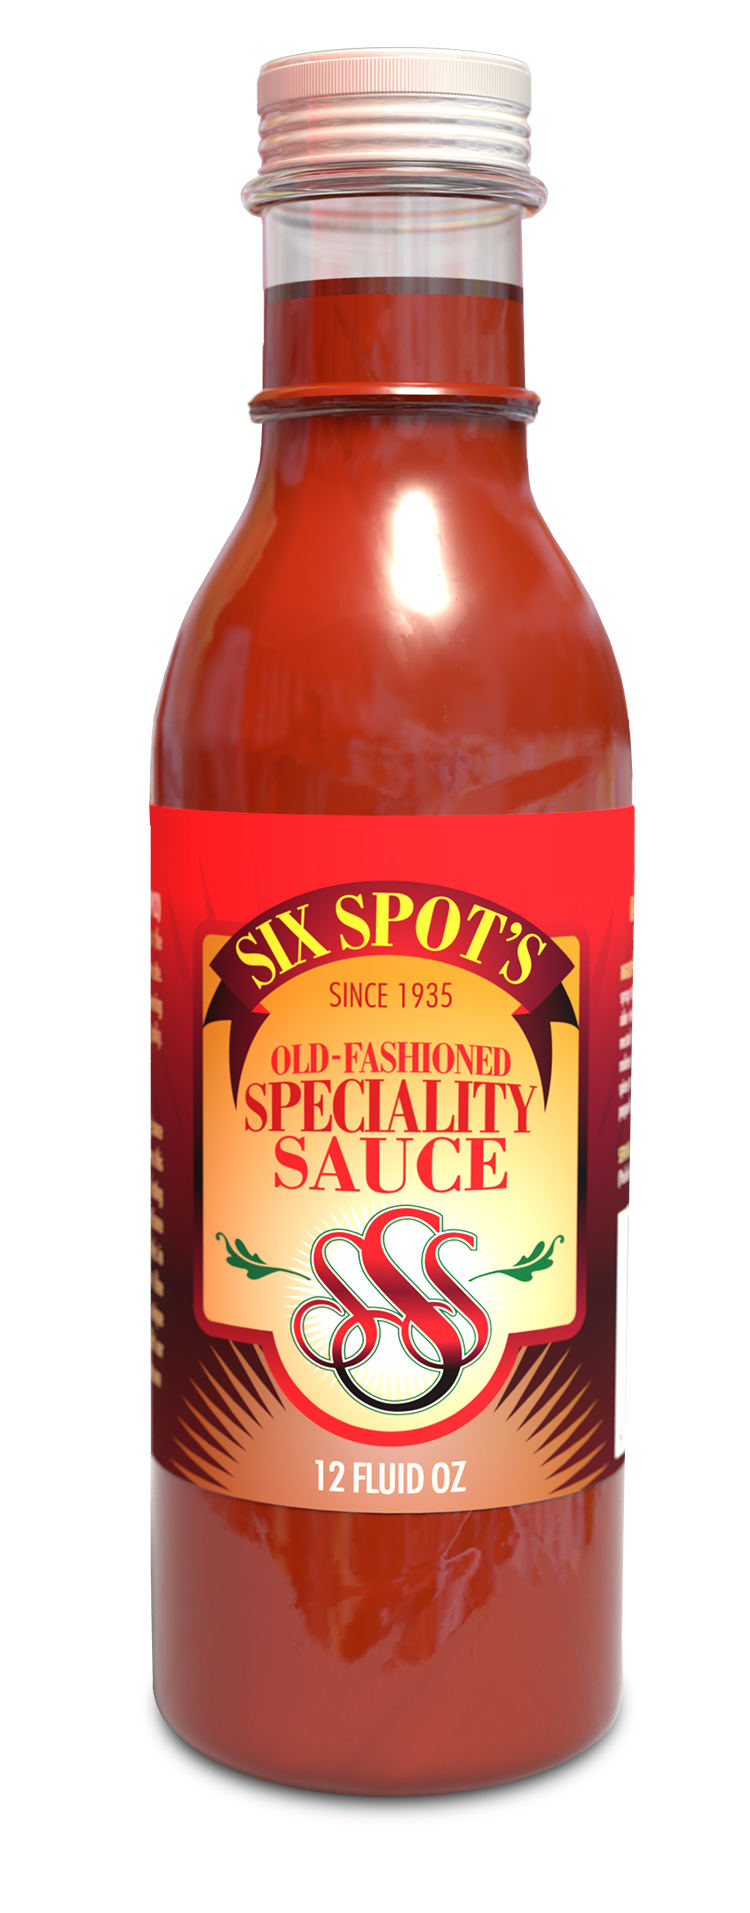 Six Spot's Old-Fashioned Specialty Sauce